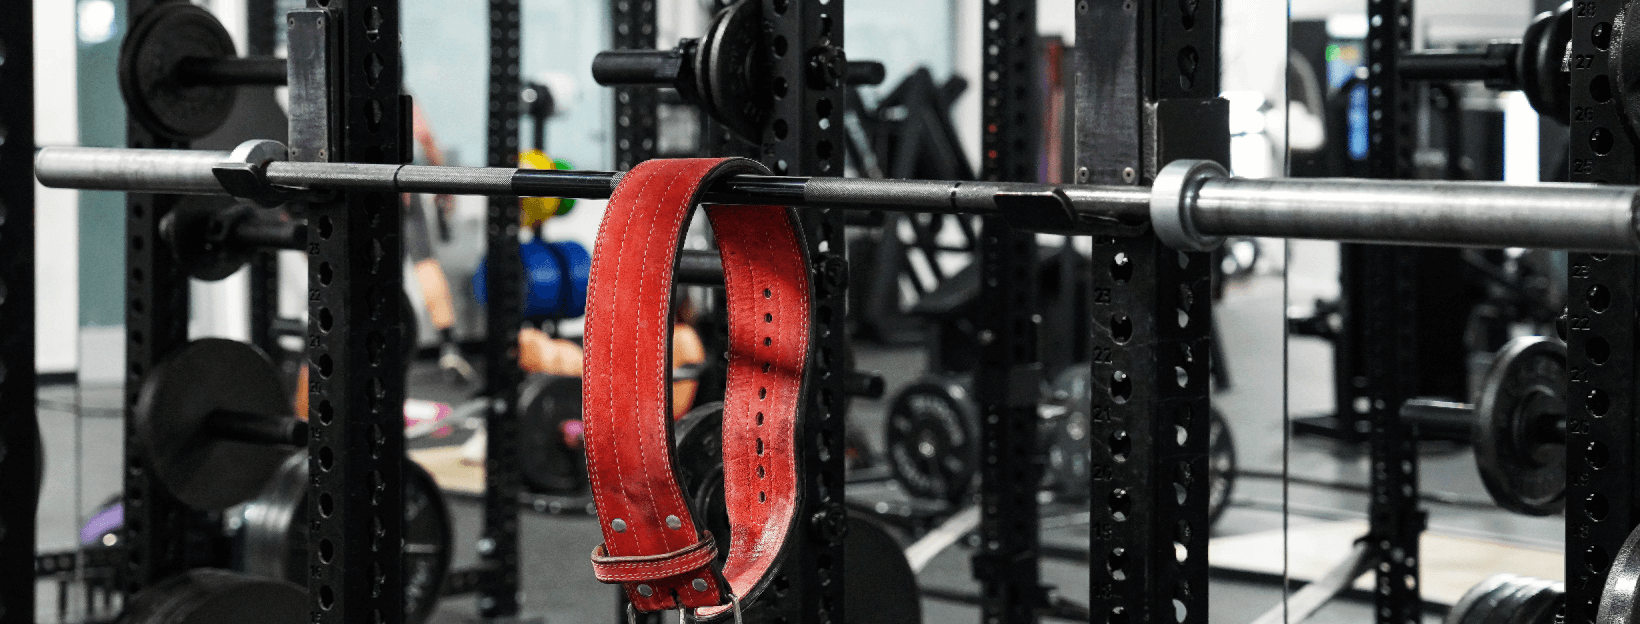 Weightlifting Straps - Lift More Weight, More Reps, More Gains